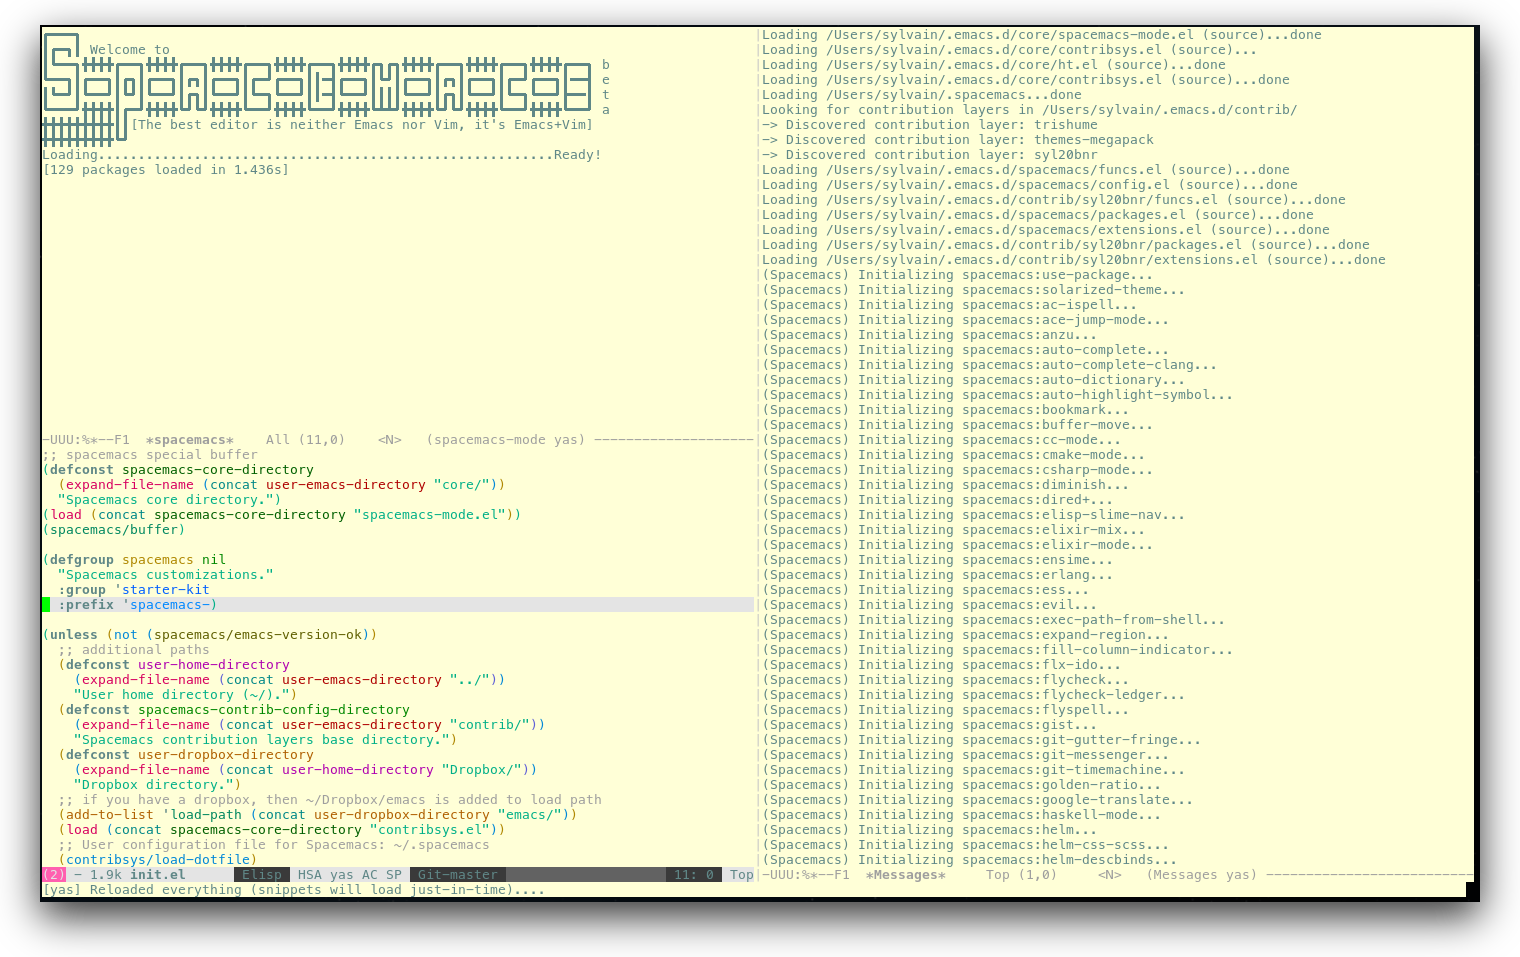 /TakeV/spacemacs/media/commit/7e8c275bc517d09d8d530f36a0b0c4752797211e/doc/img/spacemacs-urxvt.png